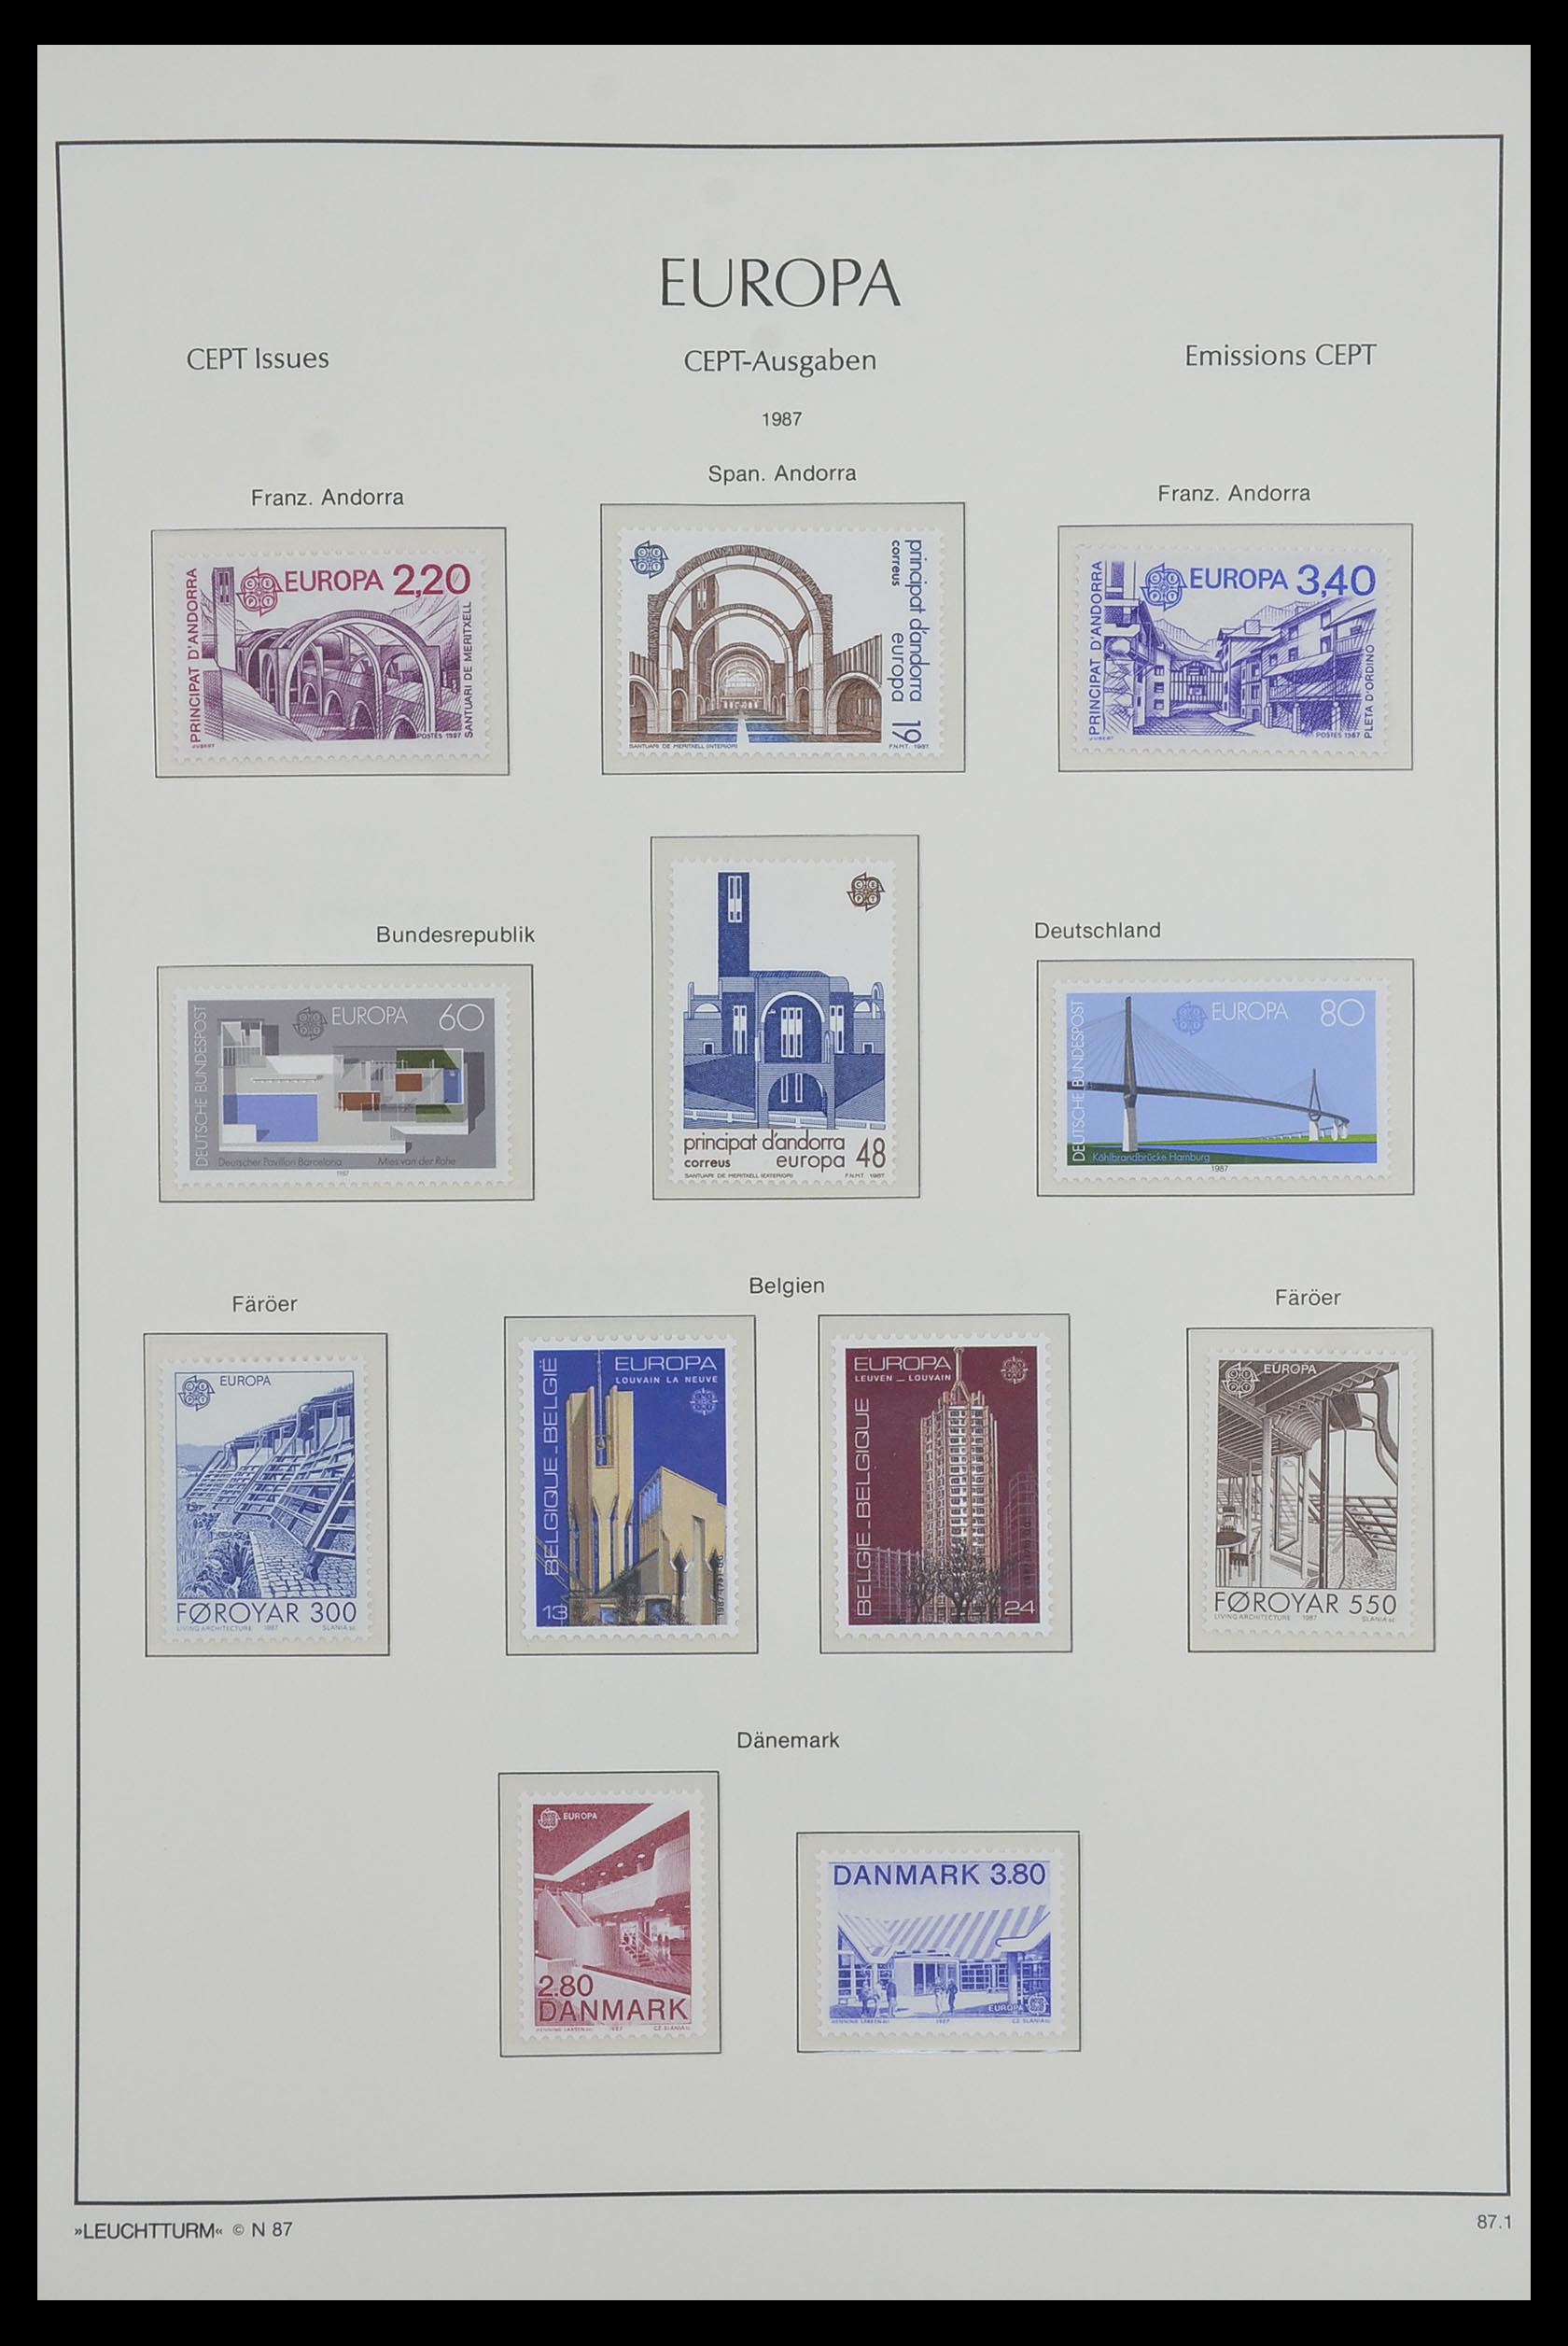 33524 096 - Stamp collection 33524 Europa CEPT 1977-2011.